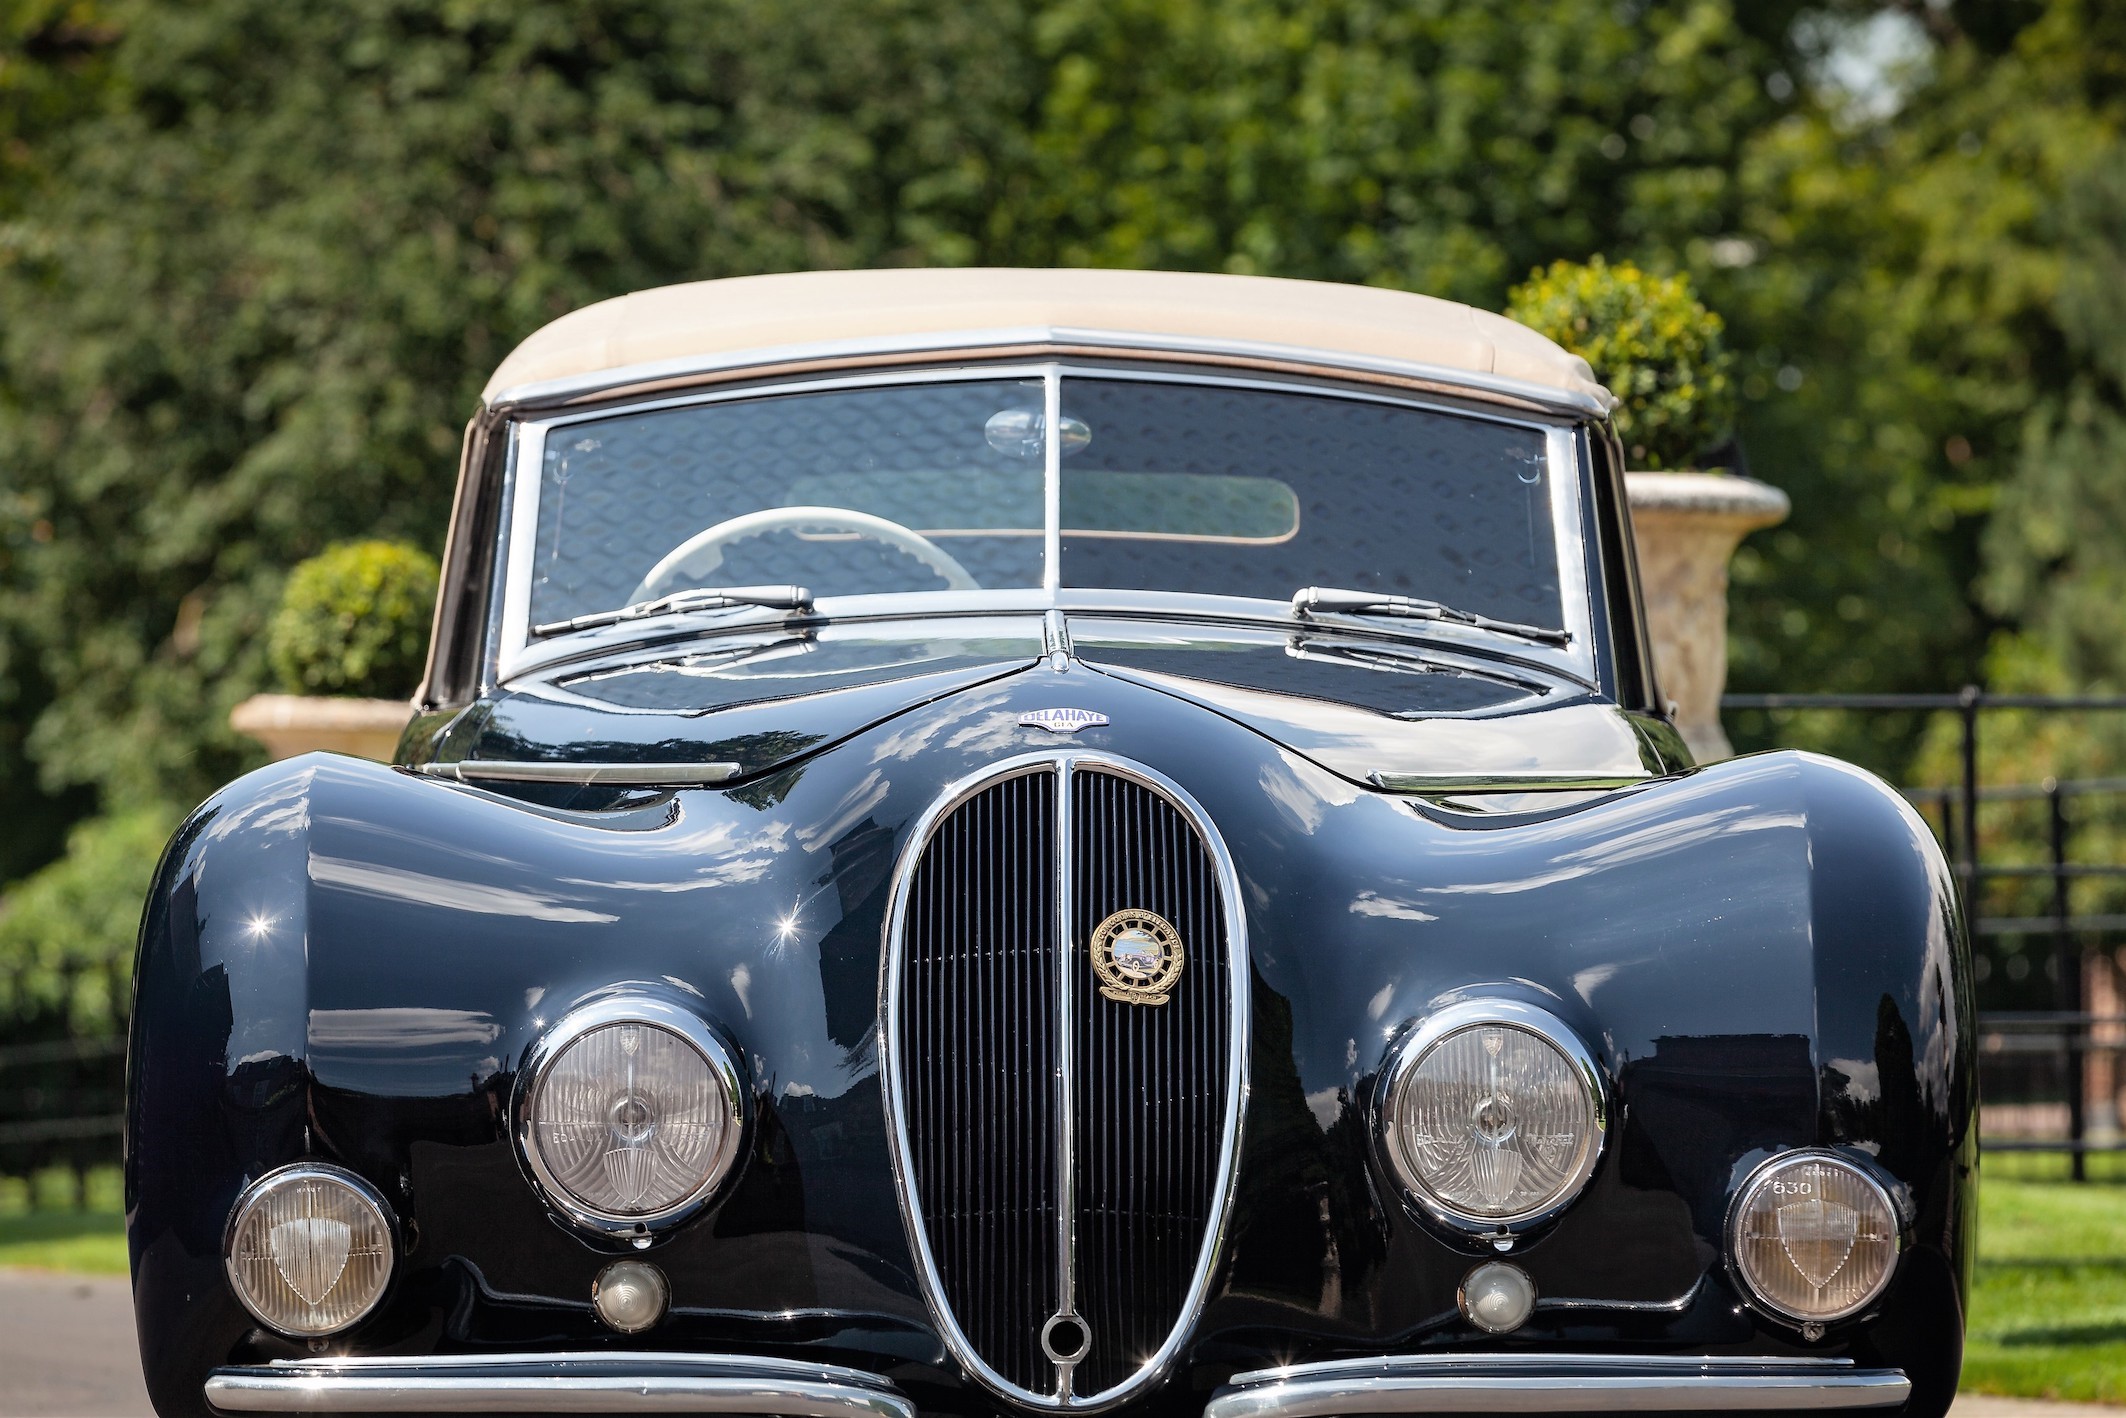 1946 Delahaye Type 135M Cabriolet Coachwork by Graber sold H&H Classics Auction